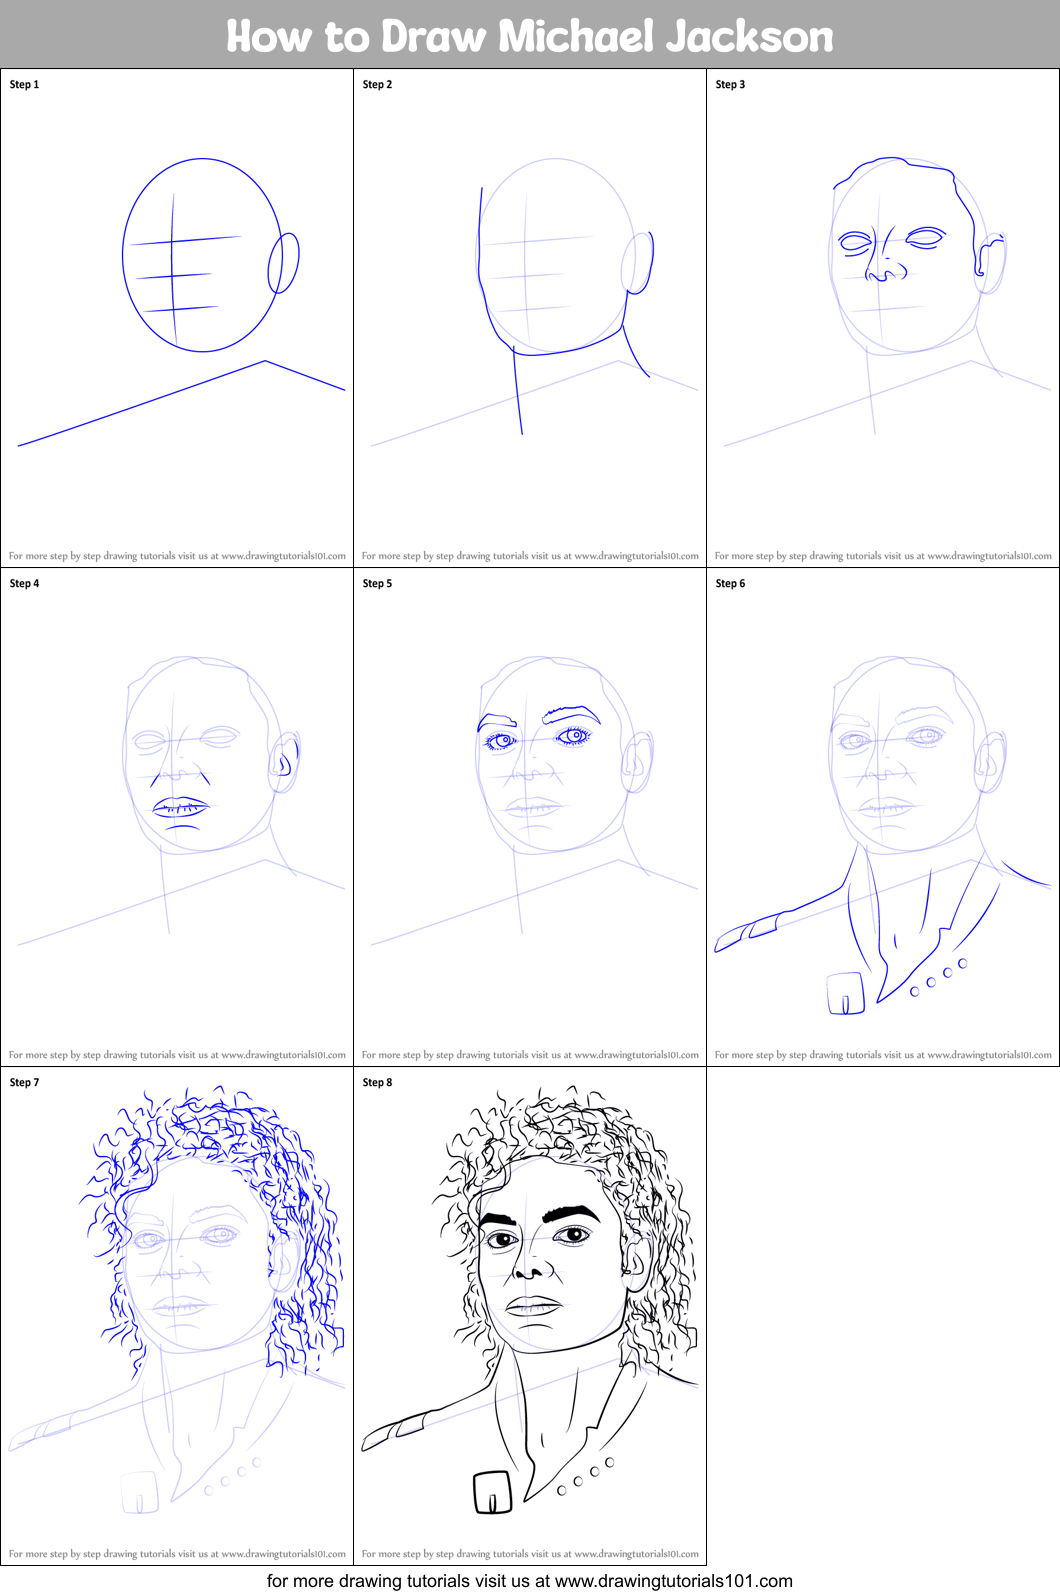 How to Draw Michael Jackson printable step by step drawing sheet